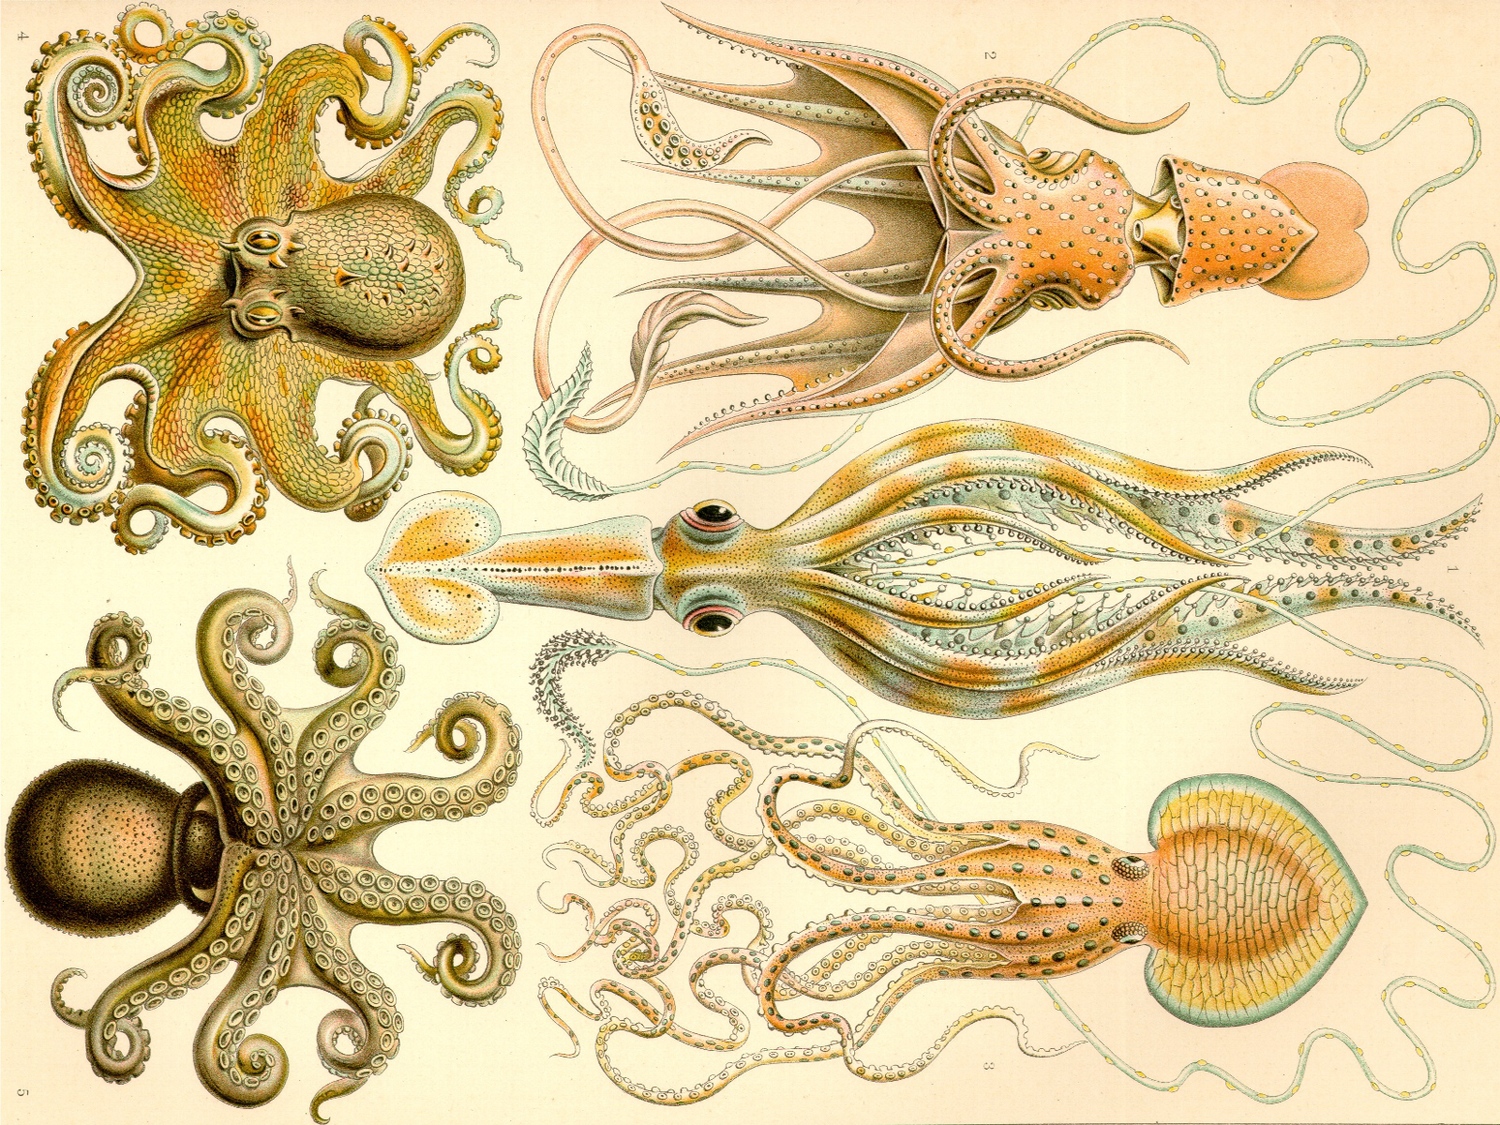 Ernst Haeckel's beautiful drawings of cephalopods. He illustrated over 100 animals and sea creatures, in incredible detail. Source